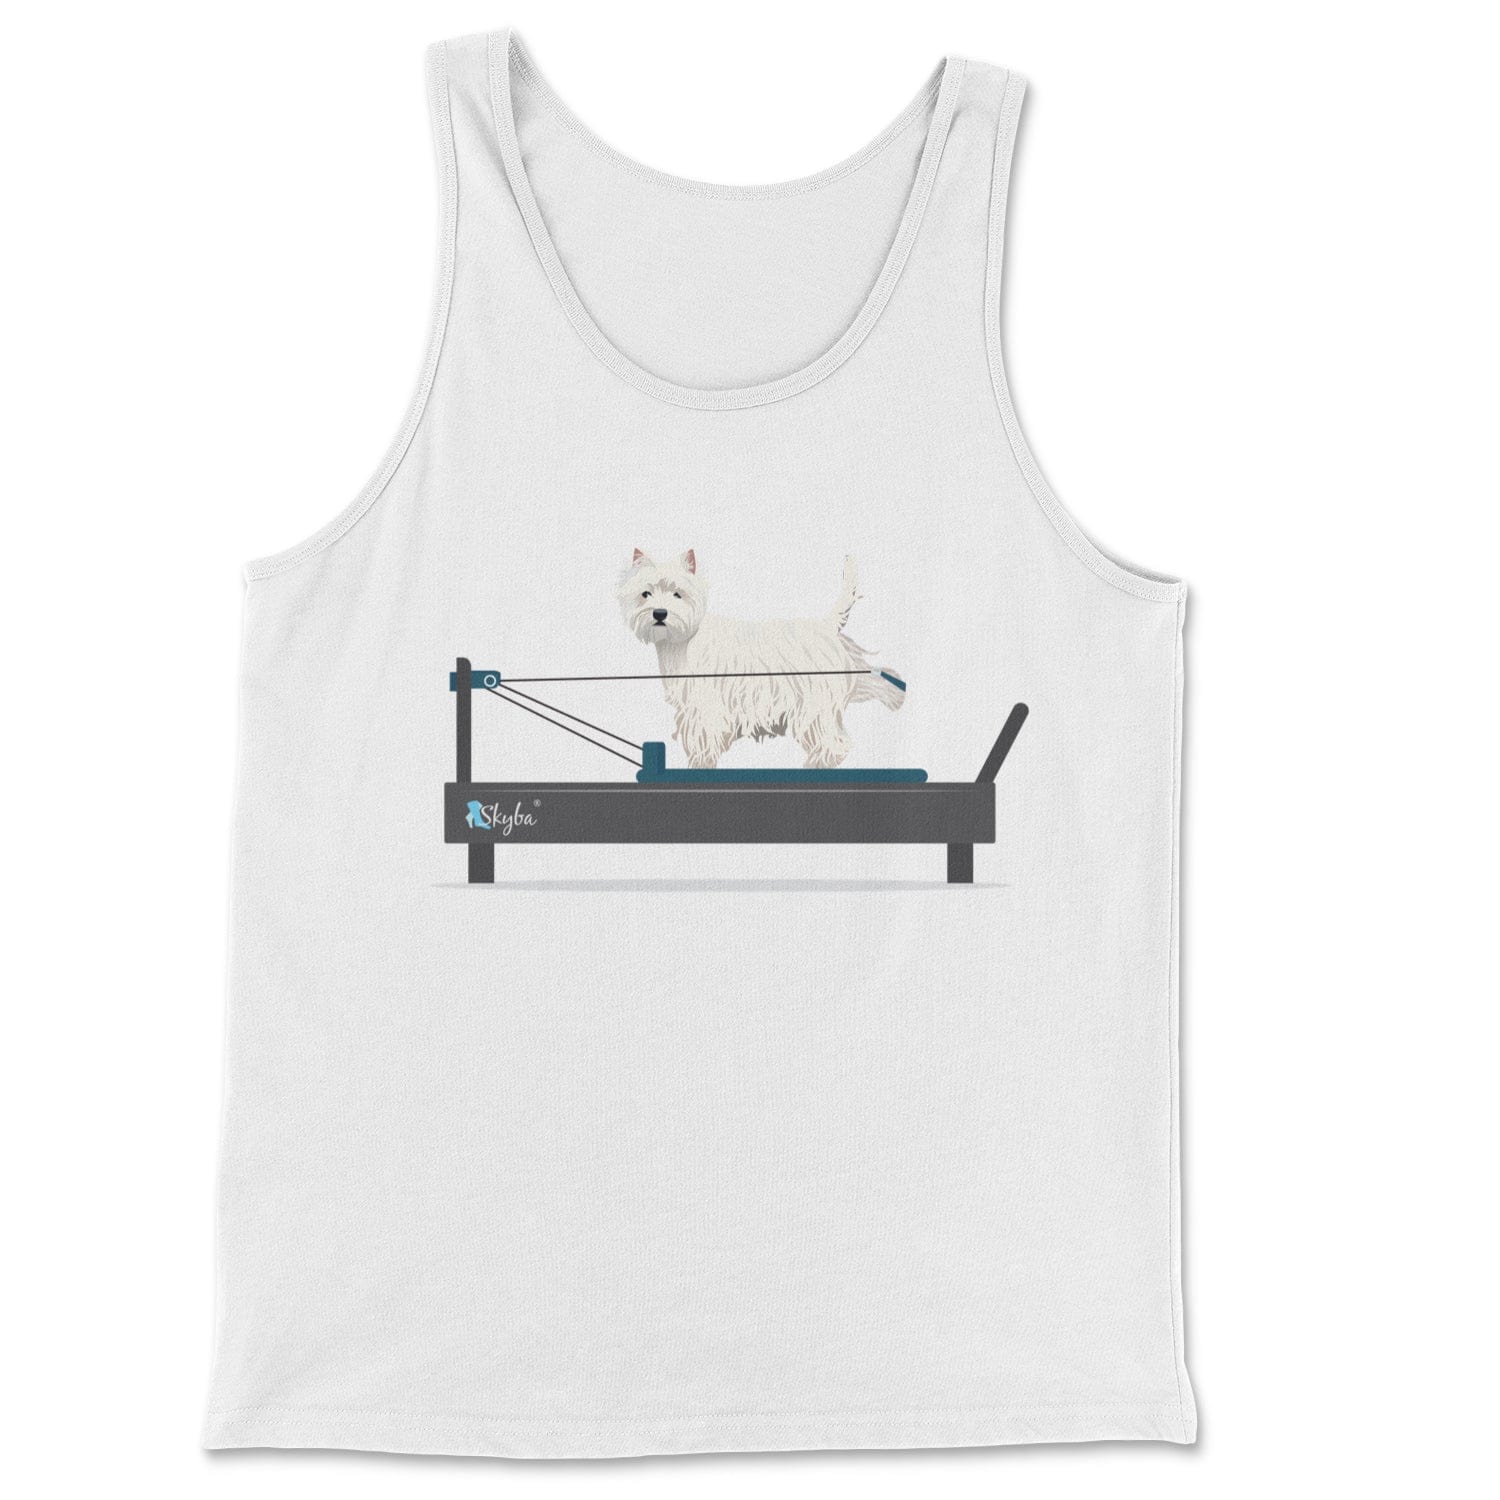 Westie on the Reformer - Classic Tank Skyba Print Material